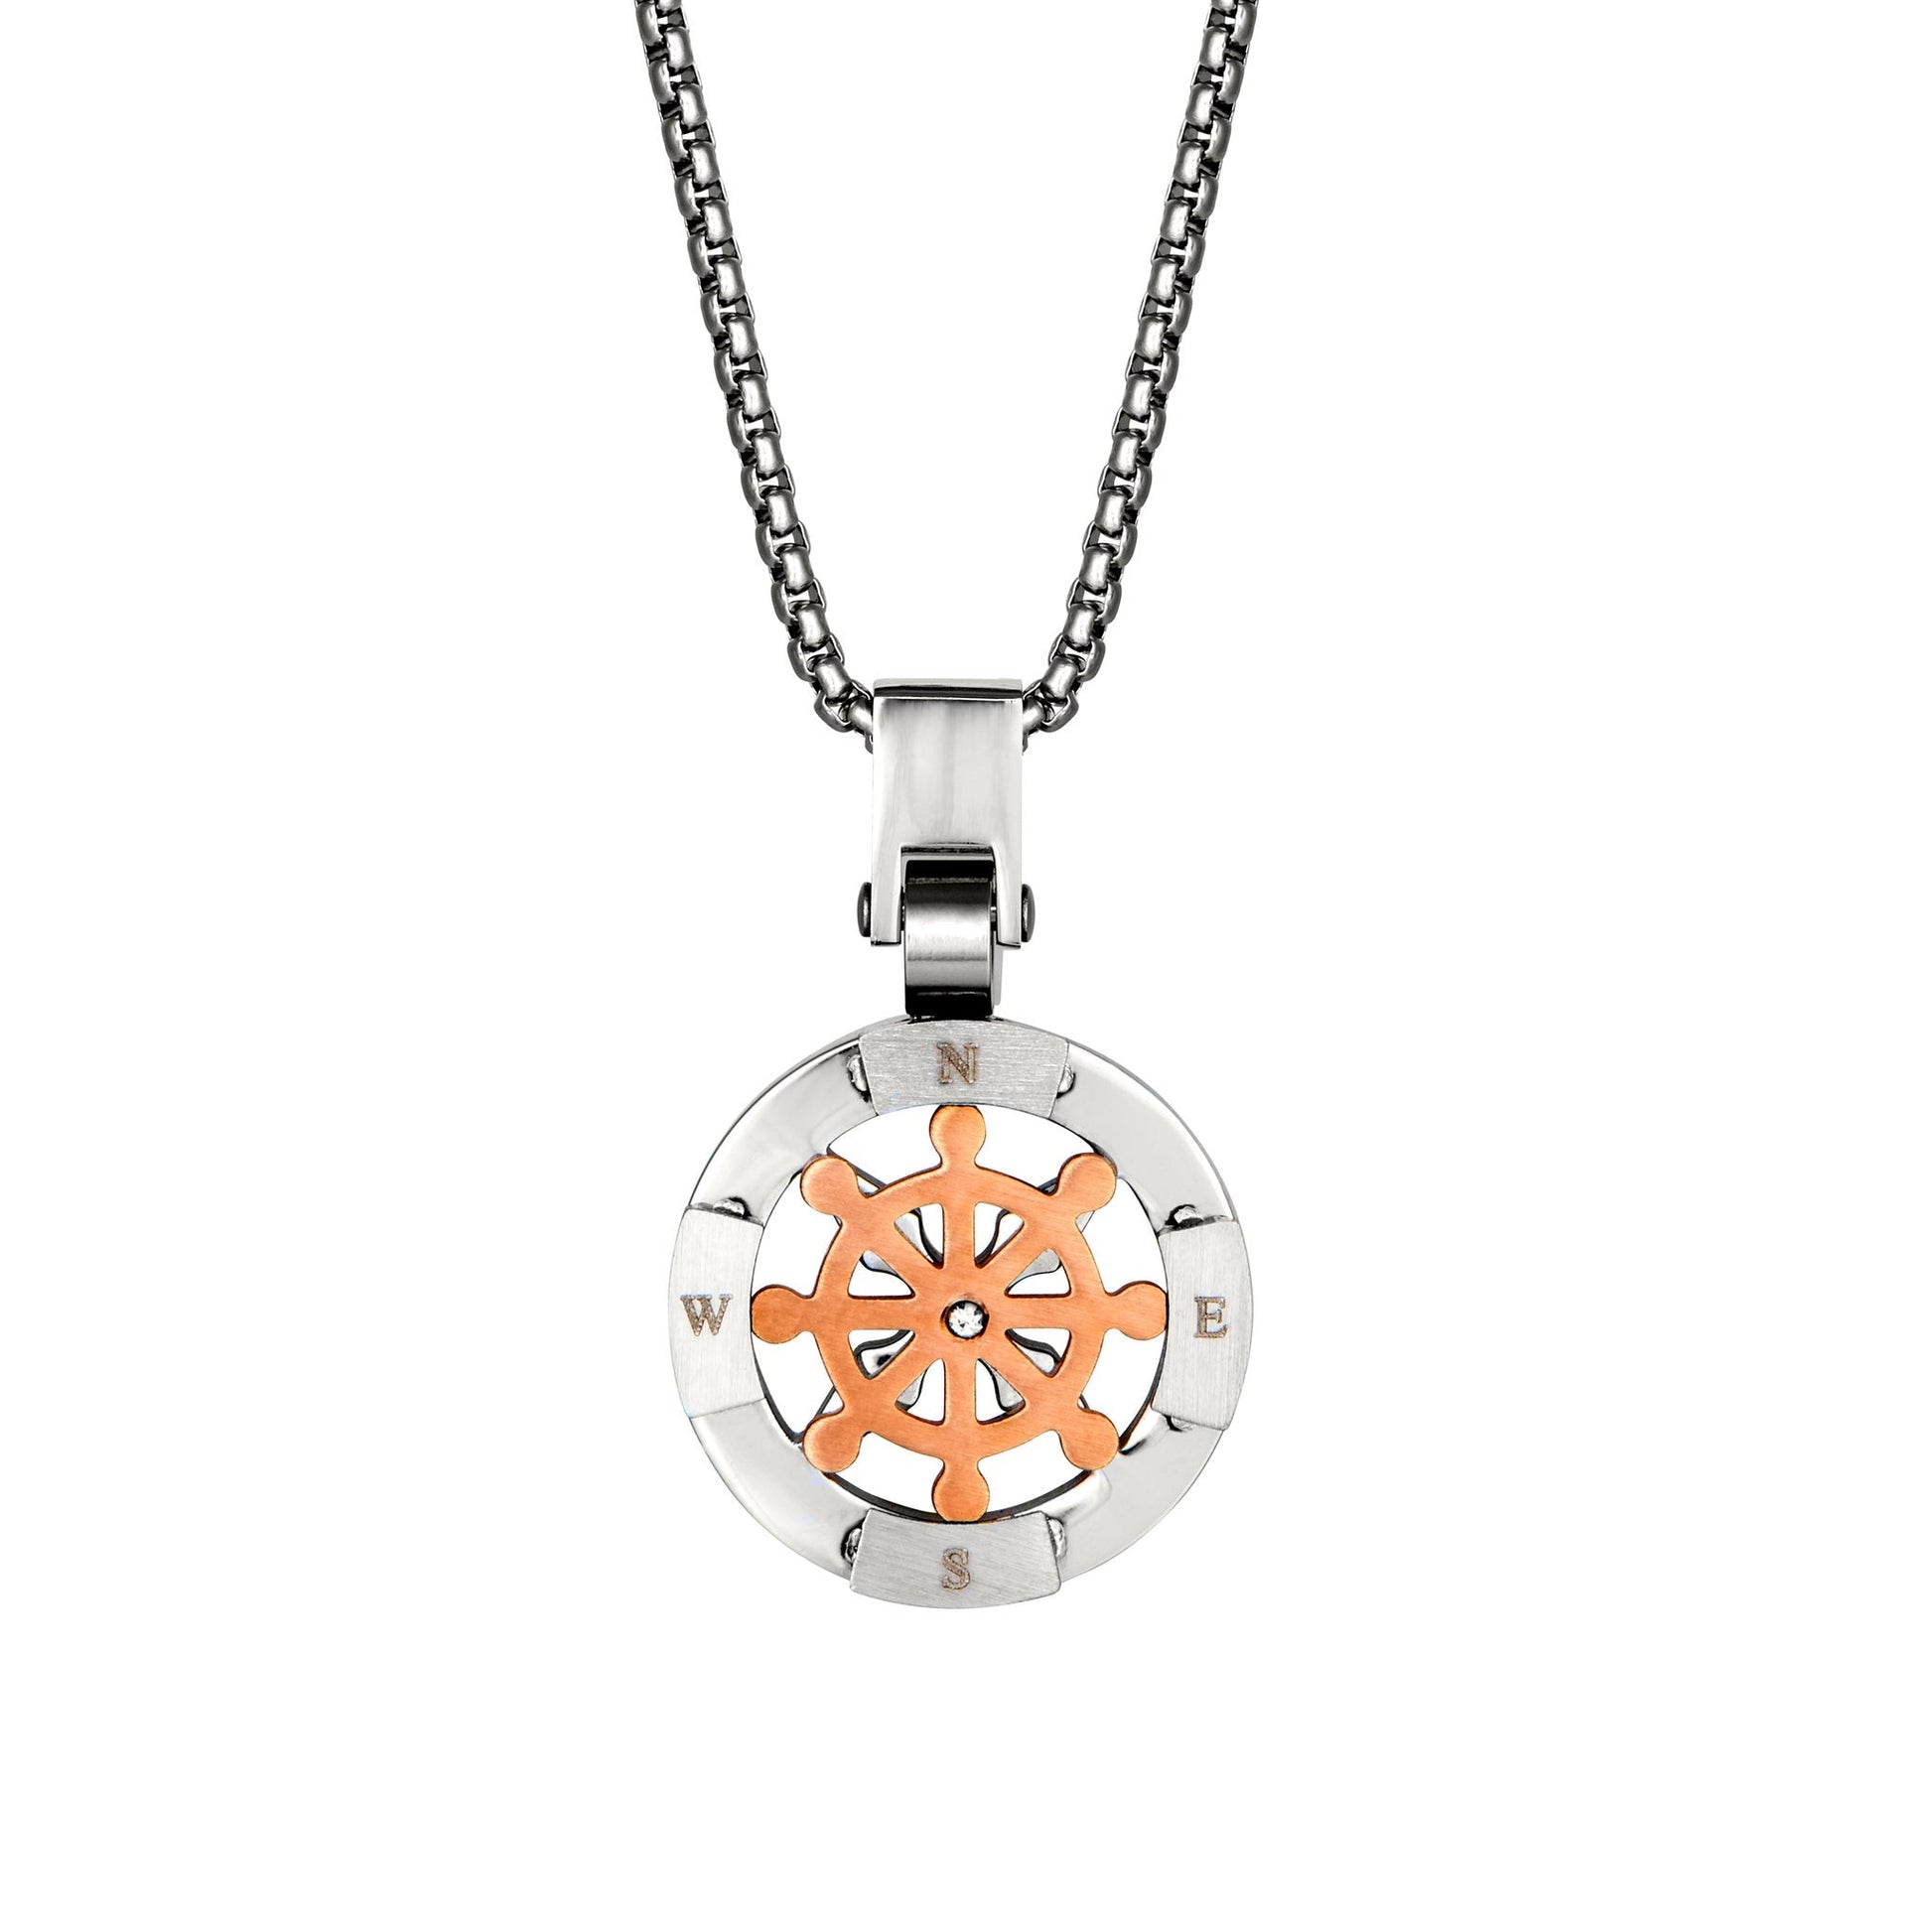 A stainless steel nautical compass & gold wheel men's necklace displayed on a neutral white background.